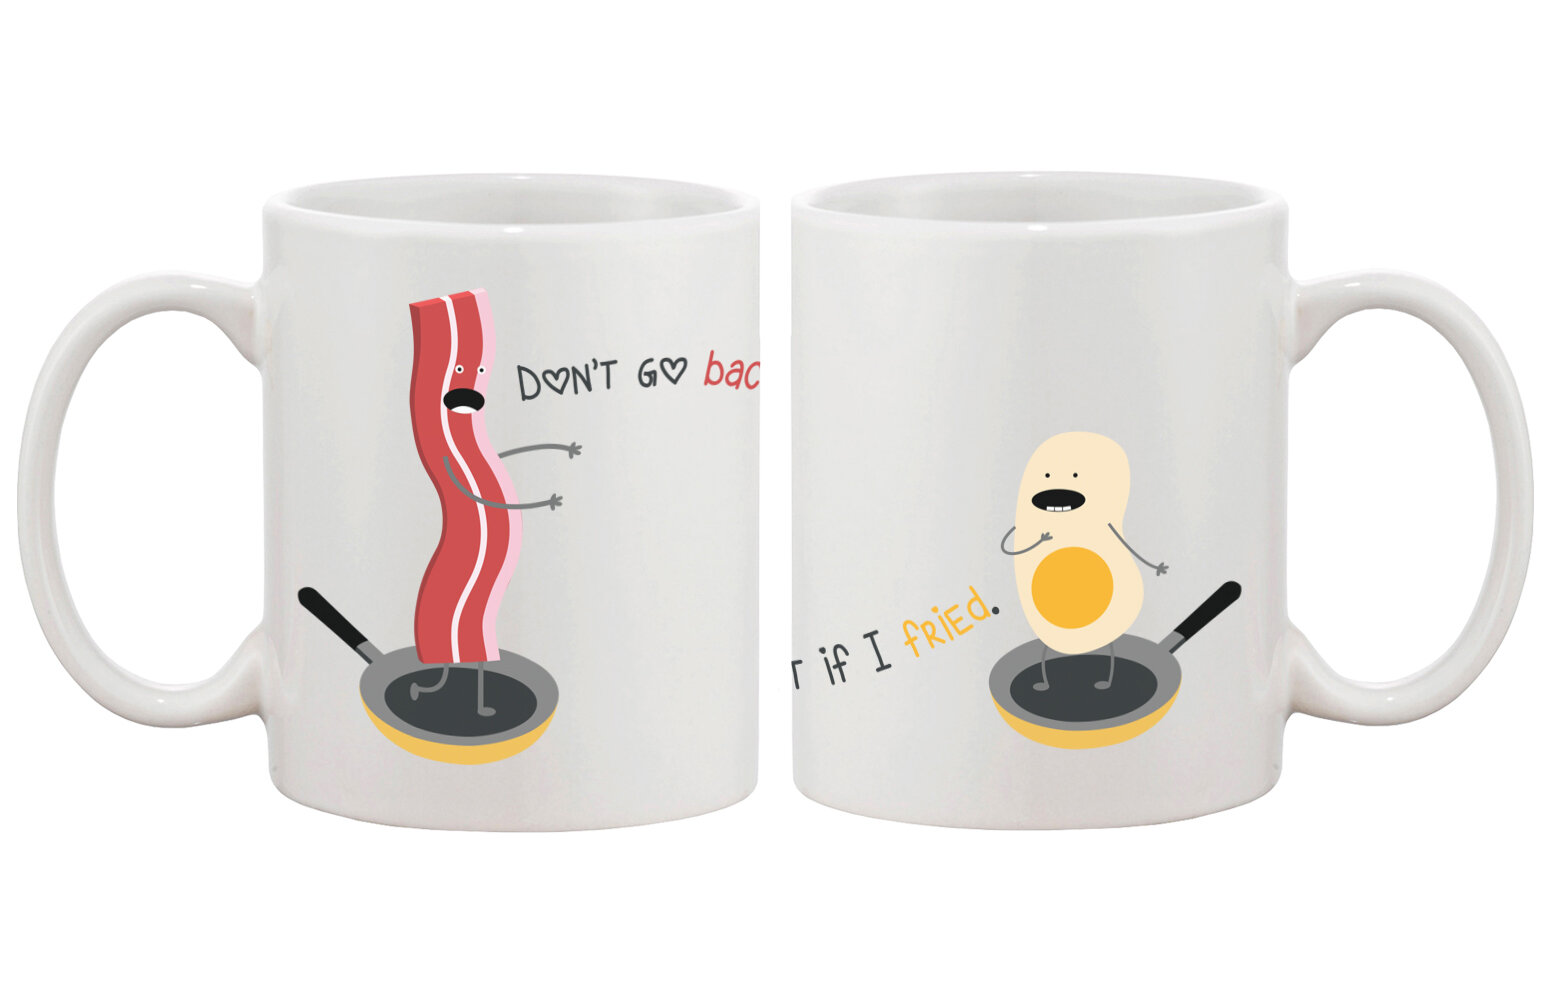 Dont Go Bacon My Heart Dish Towel Set of 2 Eggs Couldnt If I Fried